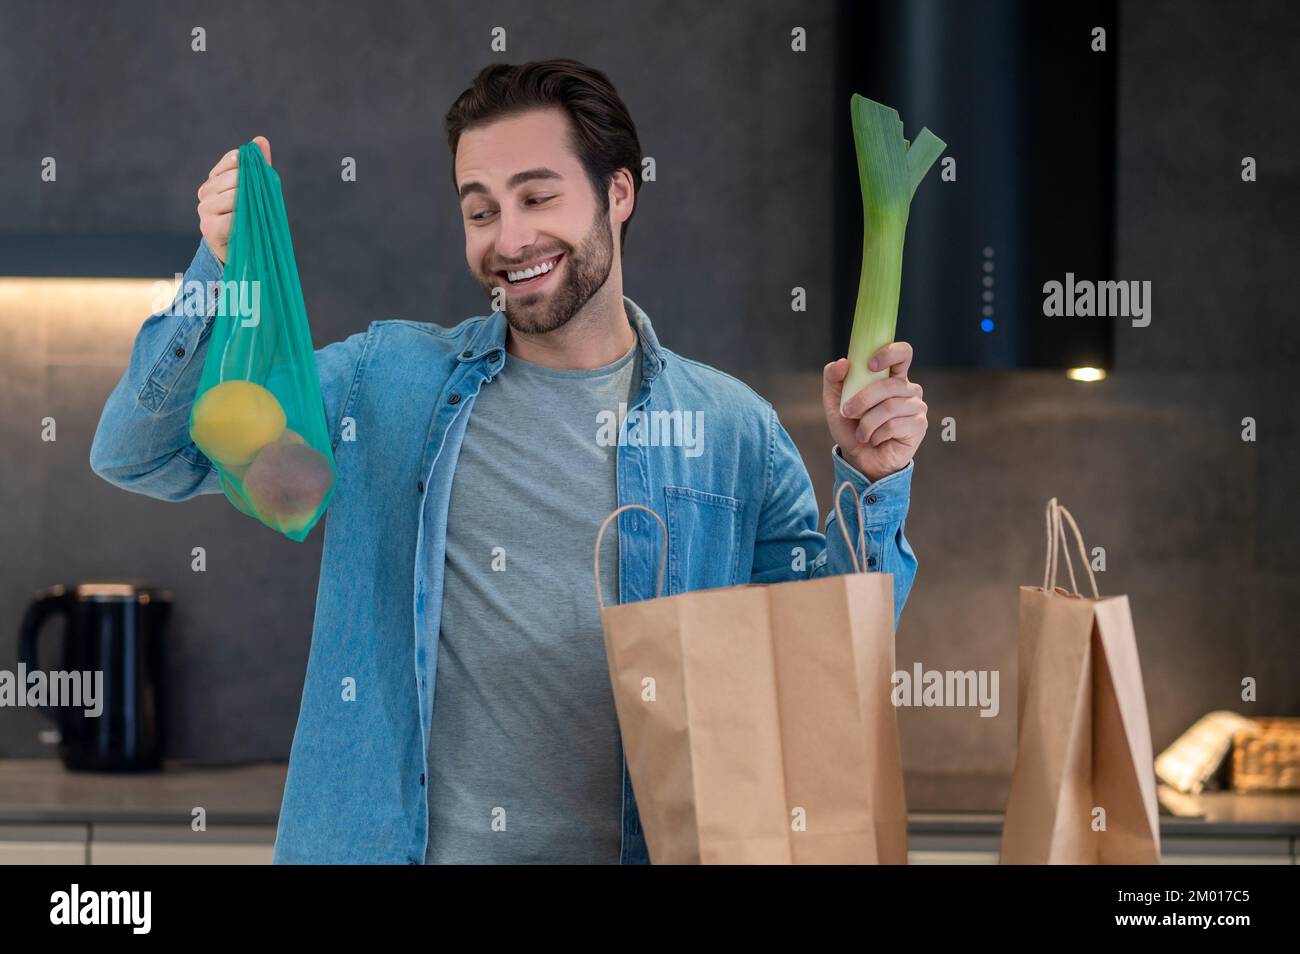 Favorite food. Happy man smiling looking at fruit in raised hand taking out groceries from bags in kitchen. Stock Photo